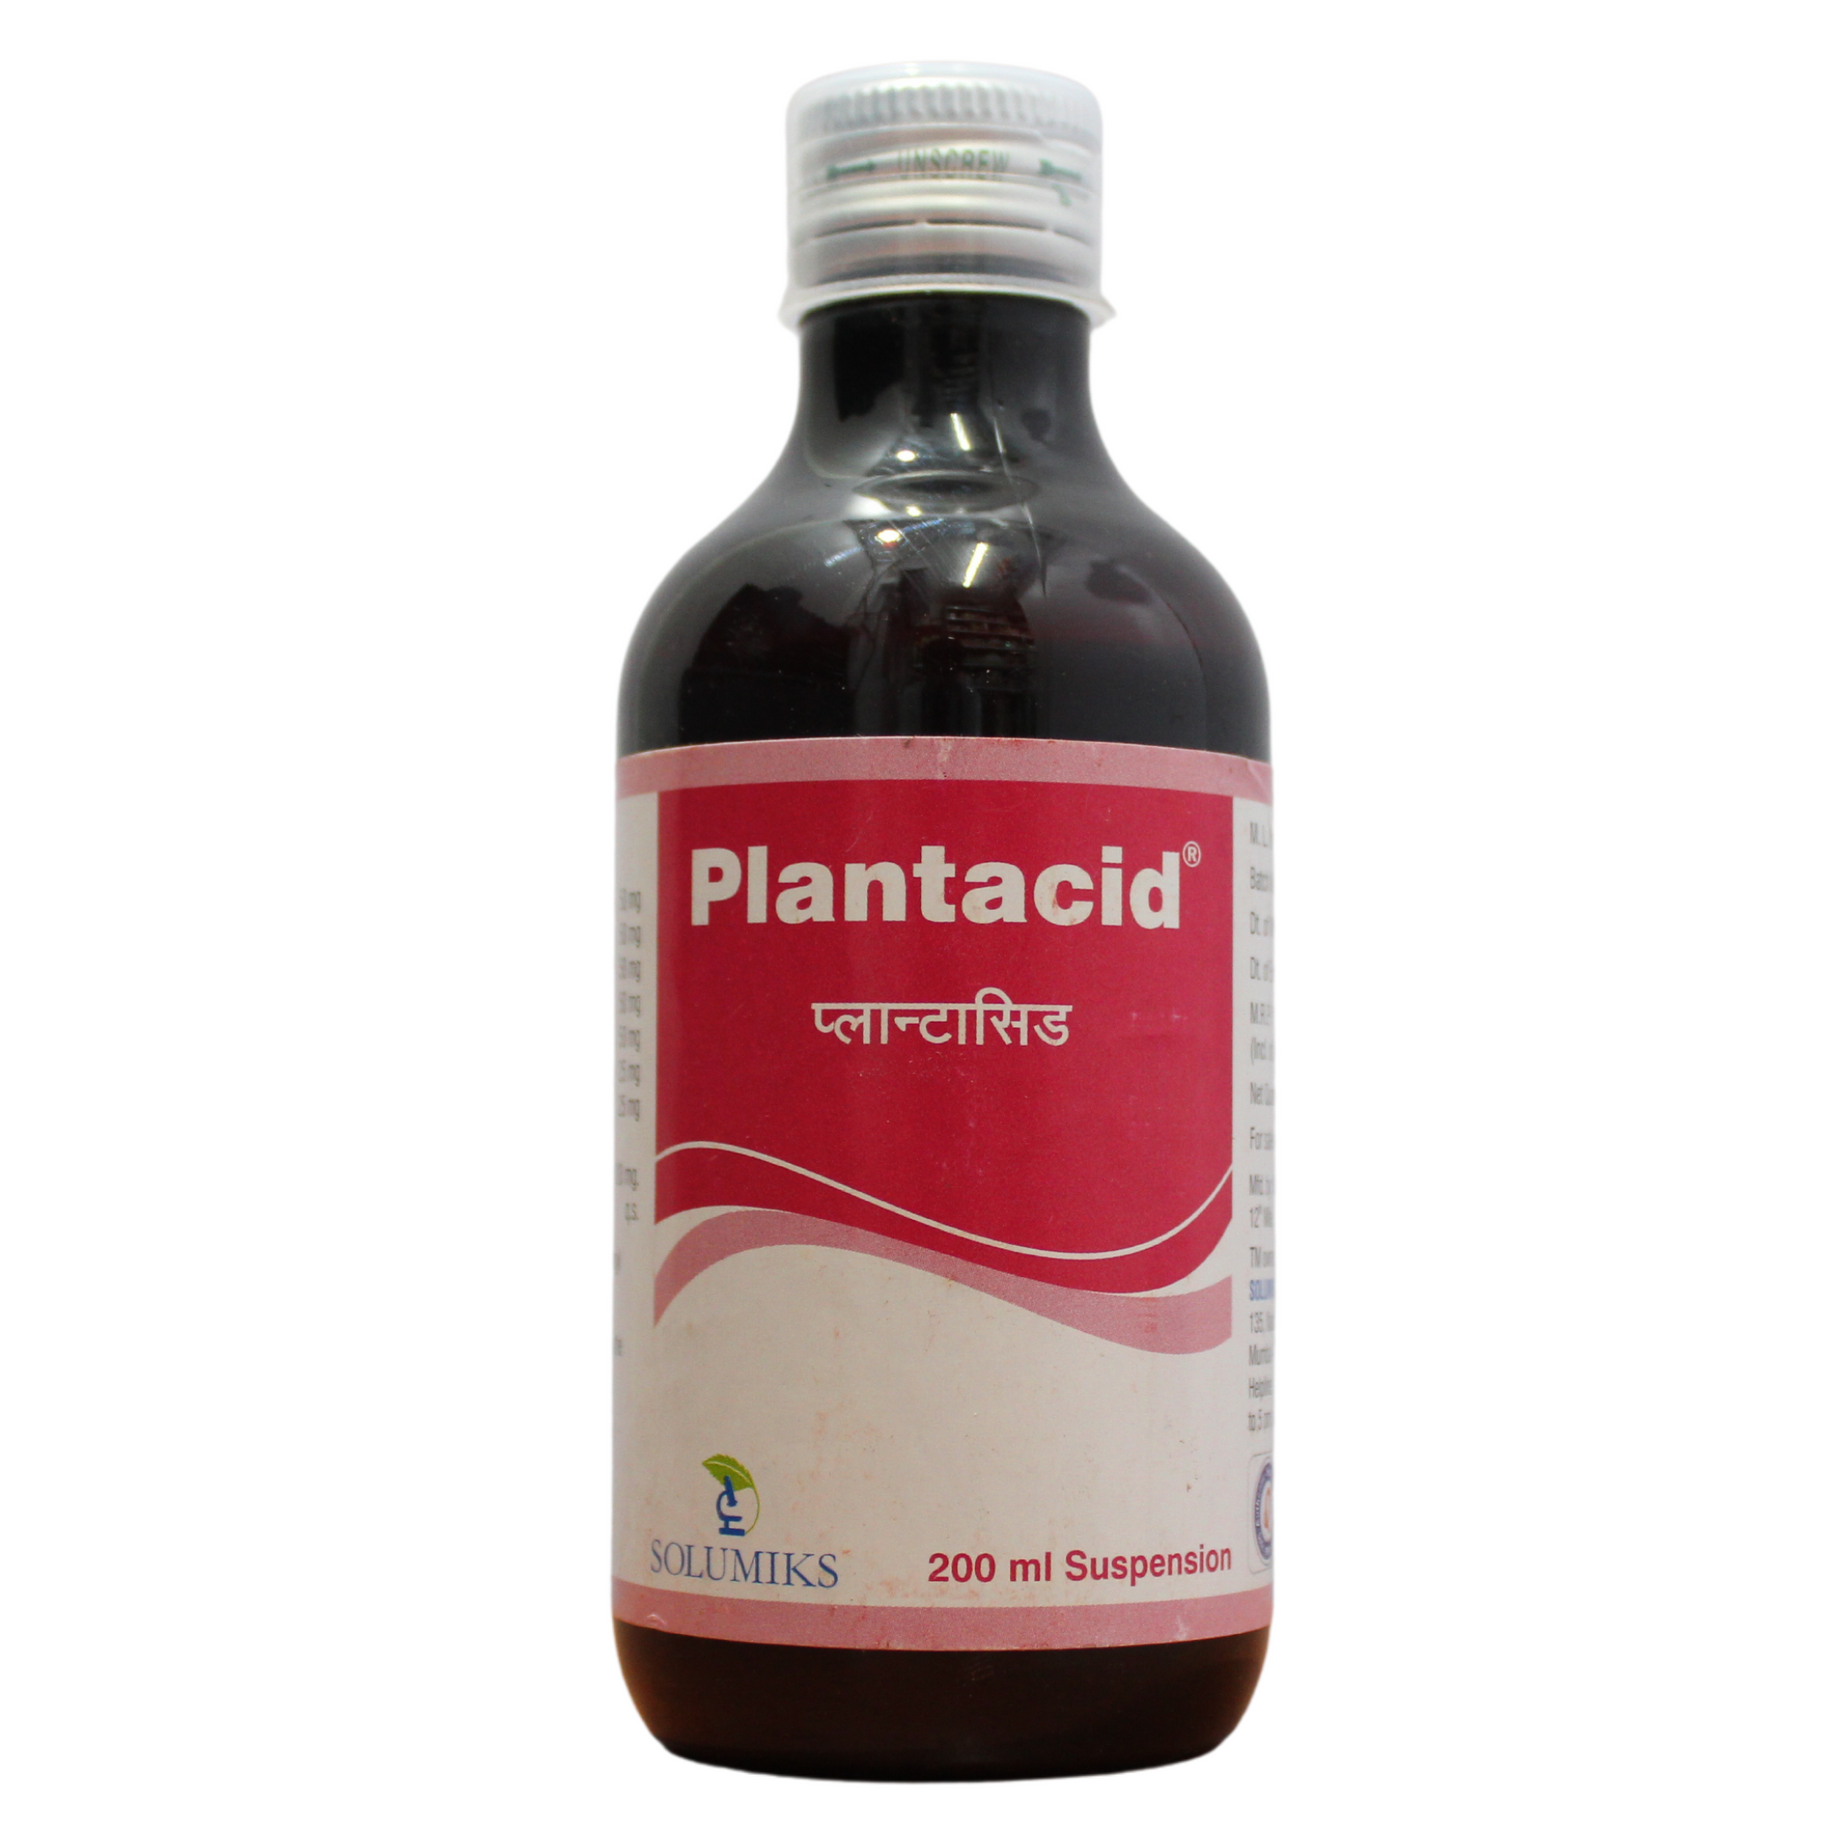 Shop Plantacid syrup - 200ml at price 112.00 from Solumiks Online - Ayush Care